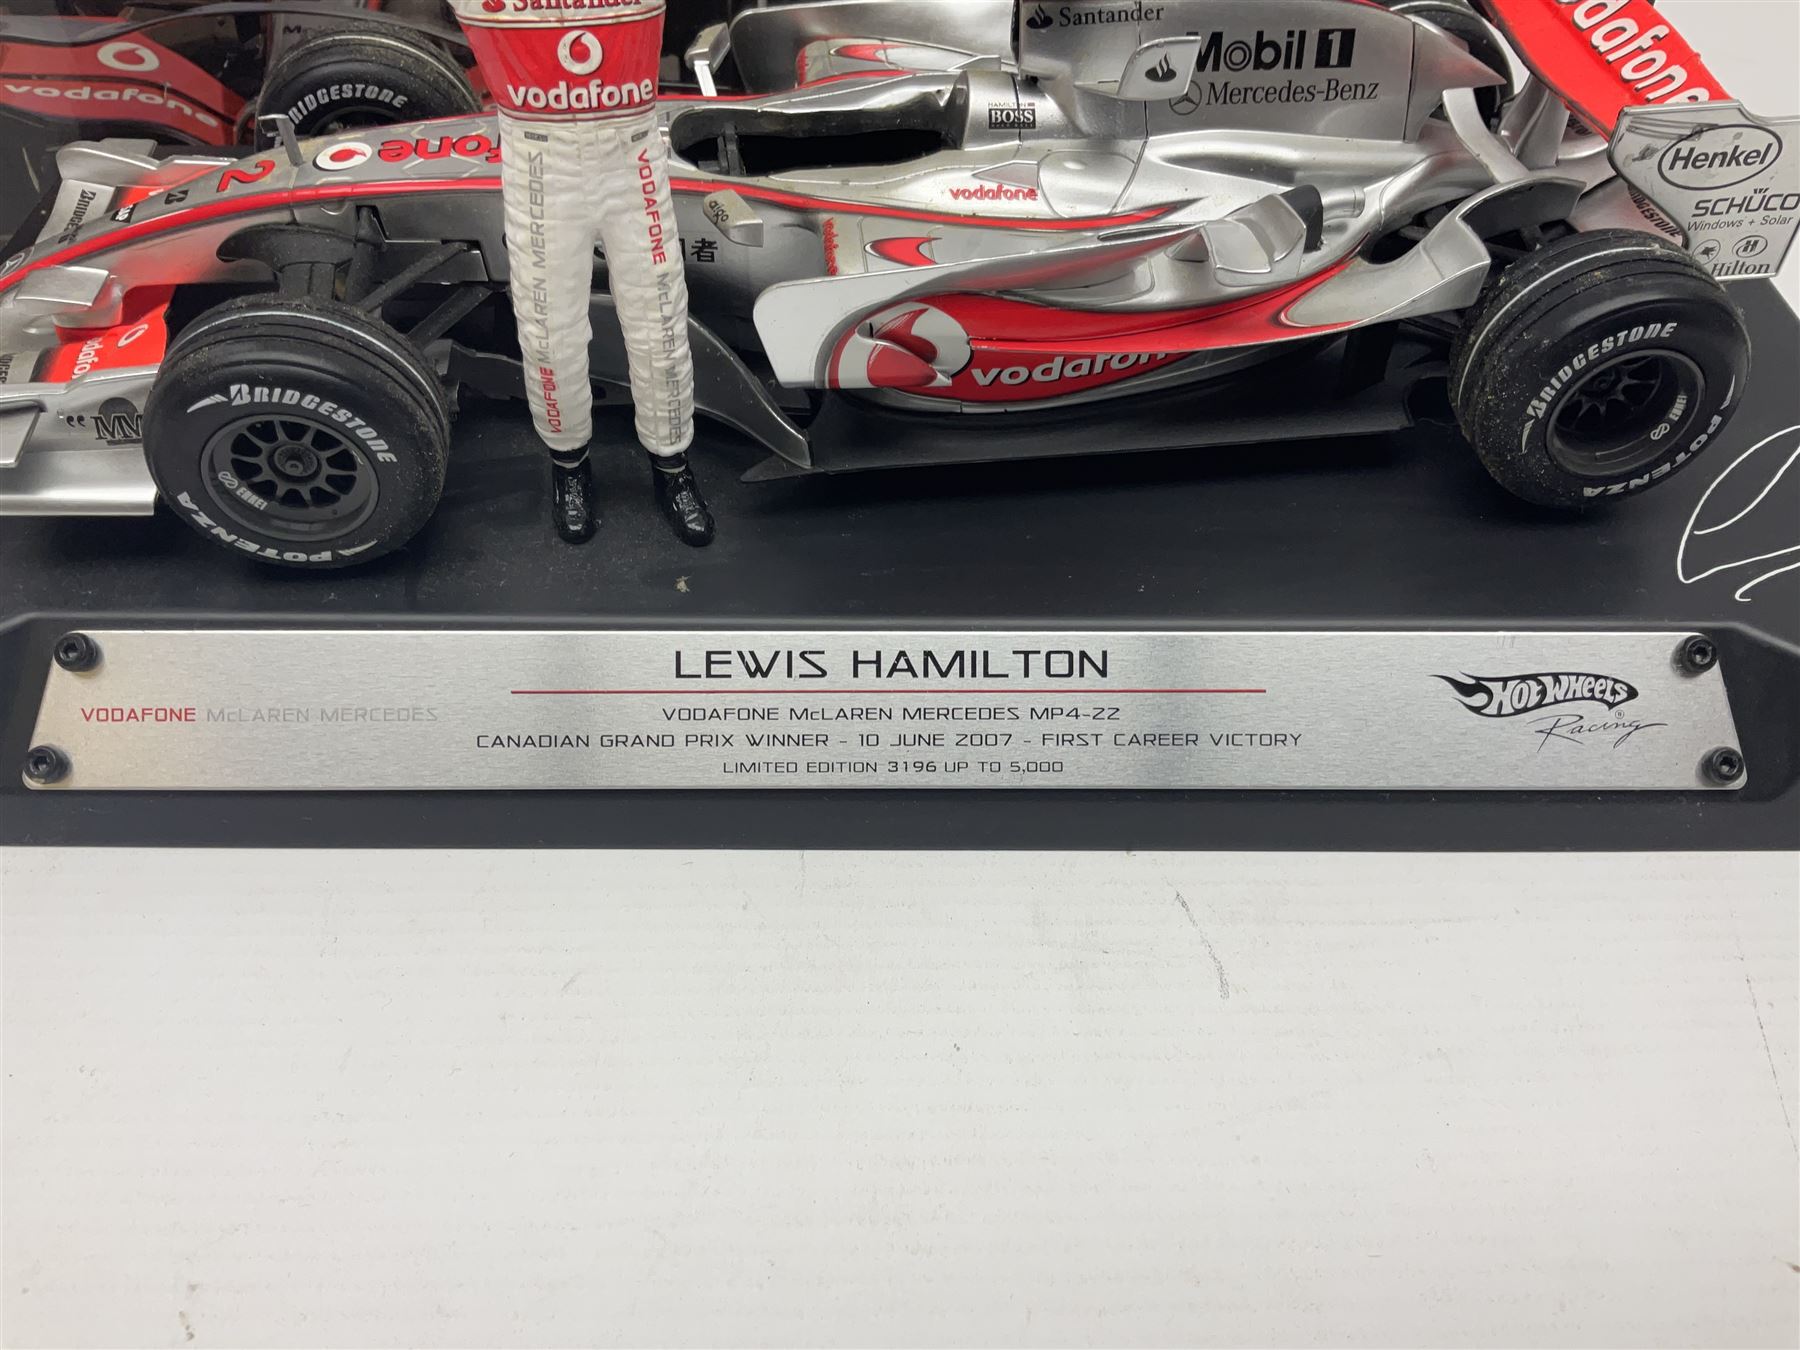 Mattel Hot Wheels 1:18 scale die-cast racing car - Vodaphone McLaren Mercedes; boxed with stand - Image 3 of 10